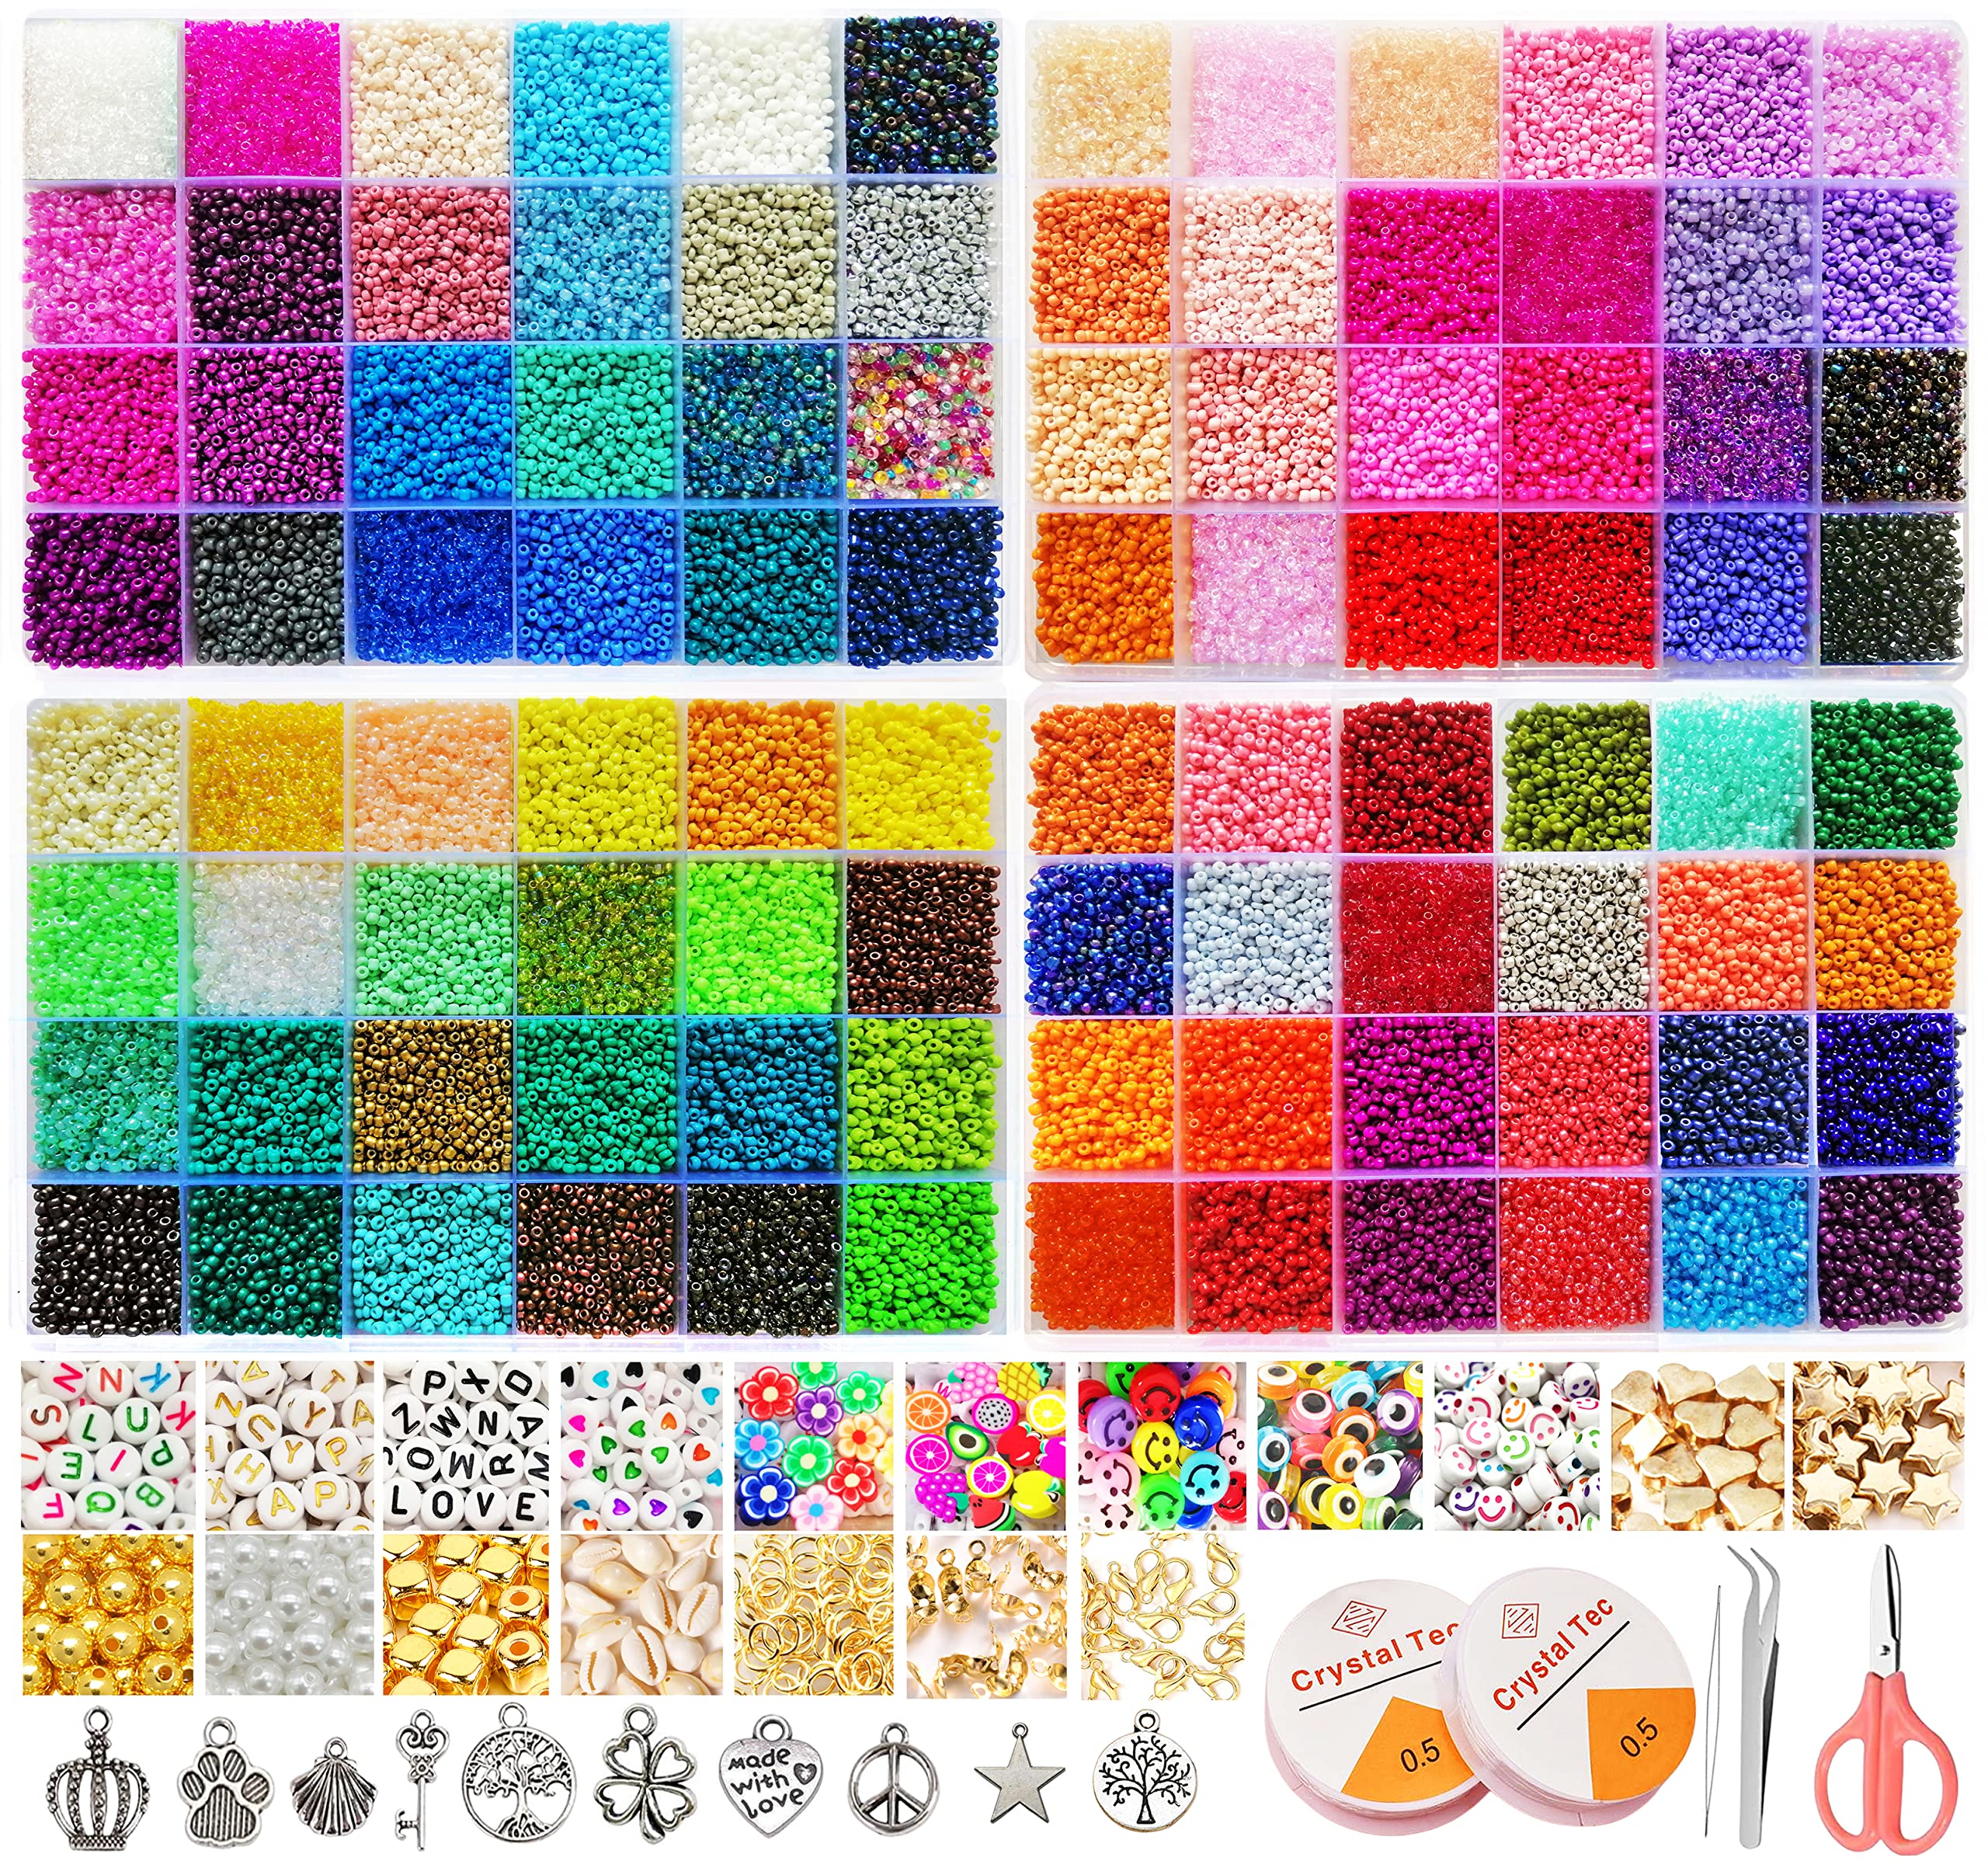 50600pcs 96 Colors 2mm Glass Seed Beads for Jewelry Making Kit 300pcs  Letter Beads Small Seed Beads Kit for Bracelets Necklace Ring Making DIY  Art Craft Kit with Elastic String and Charms